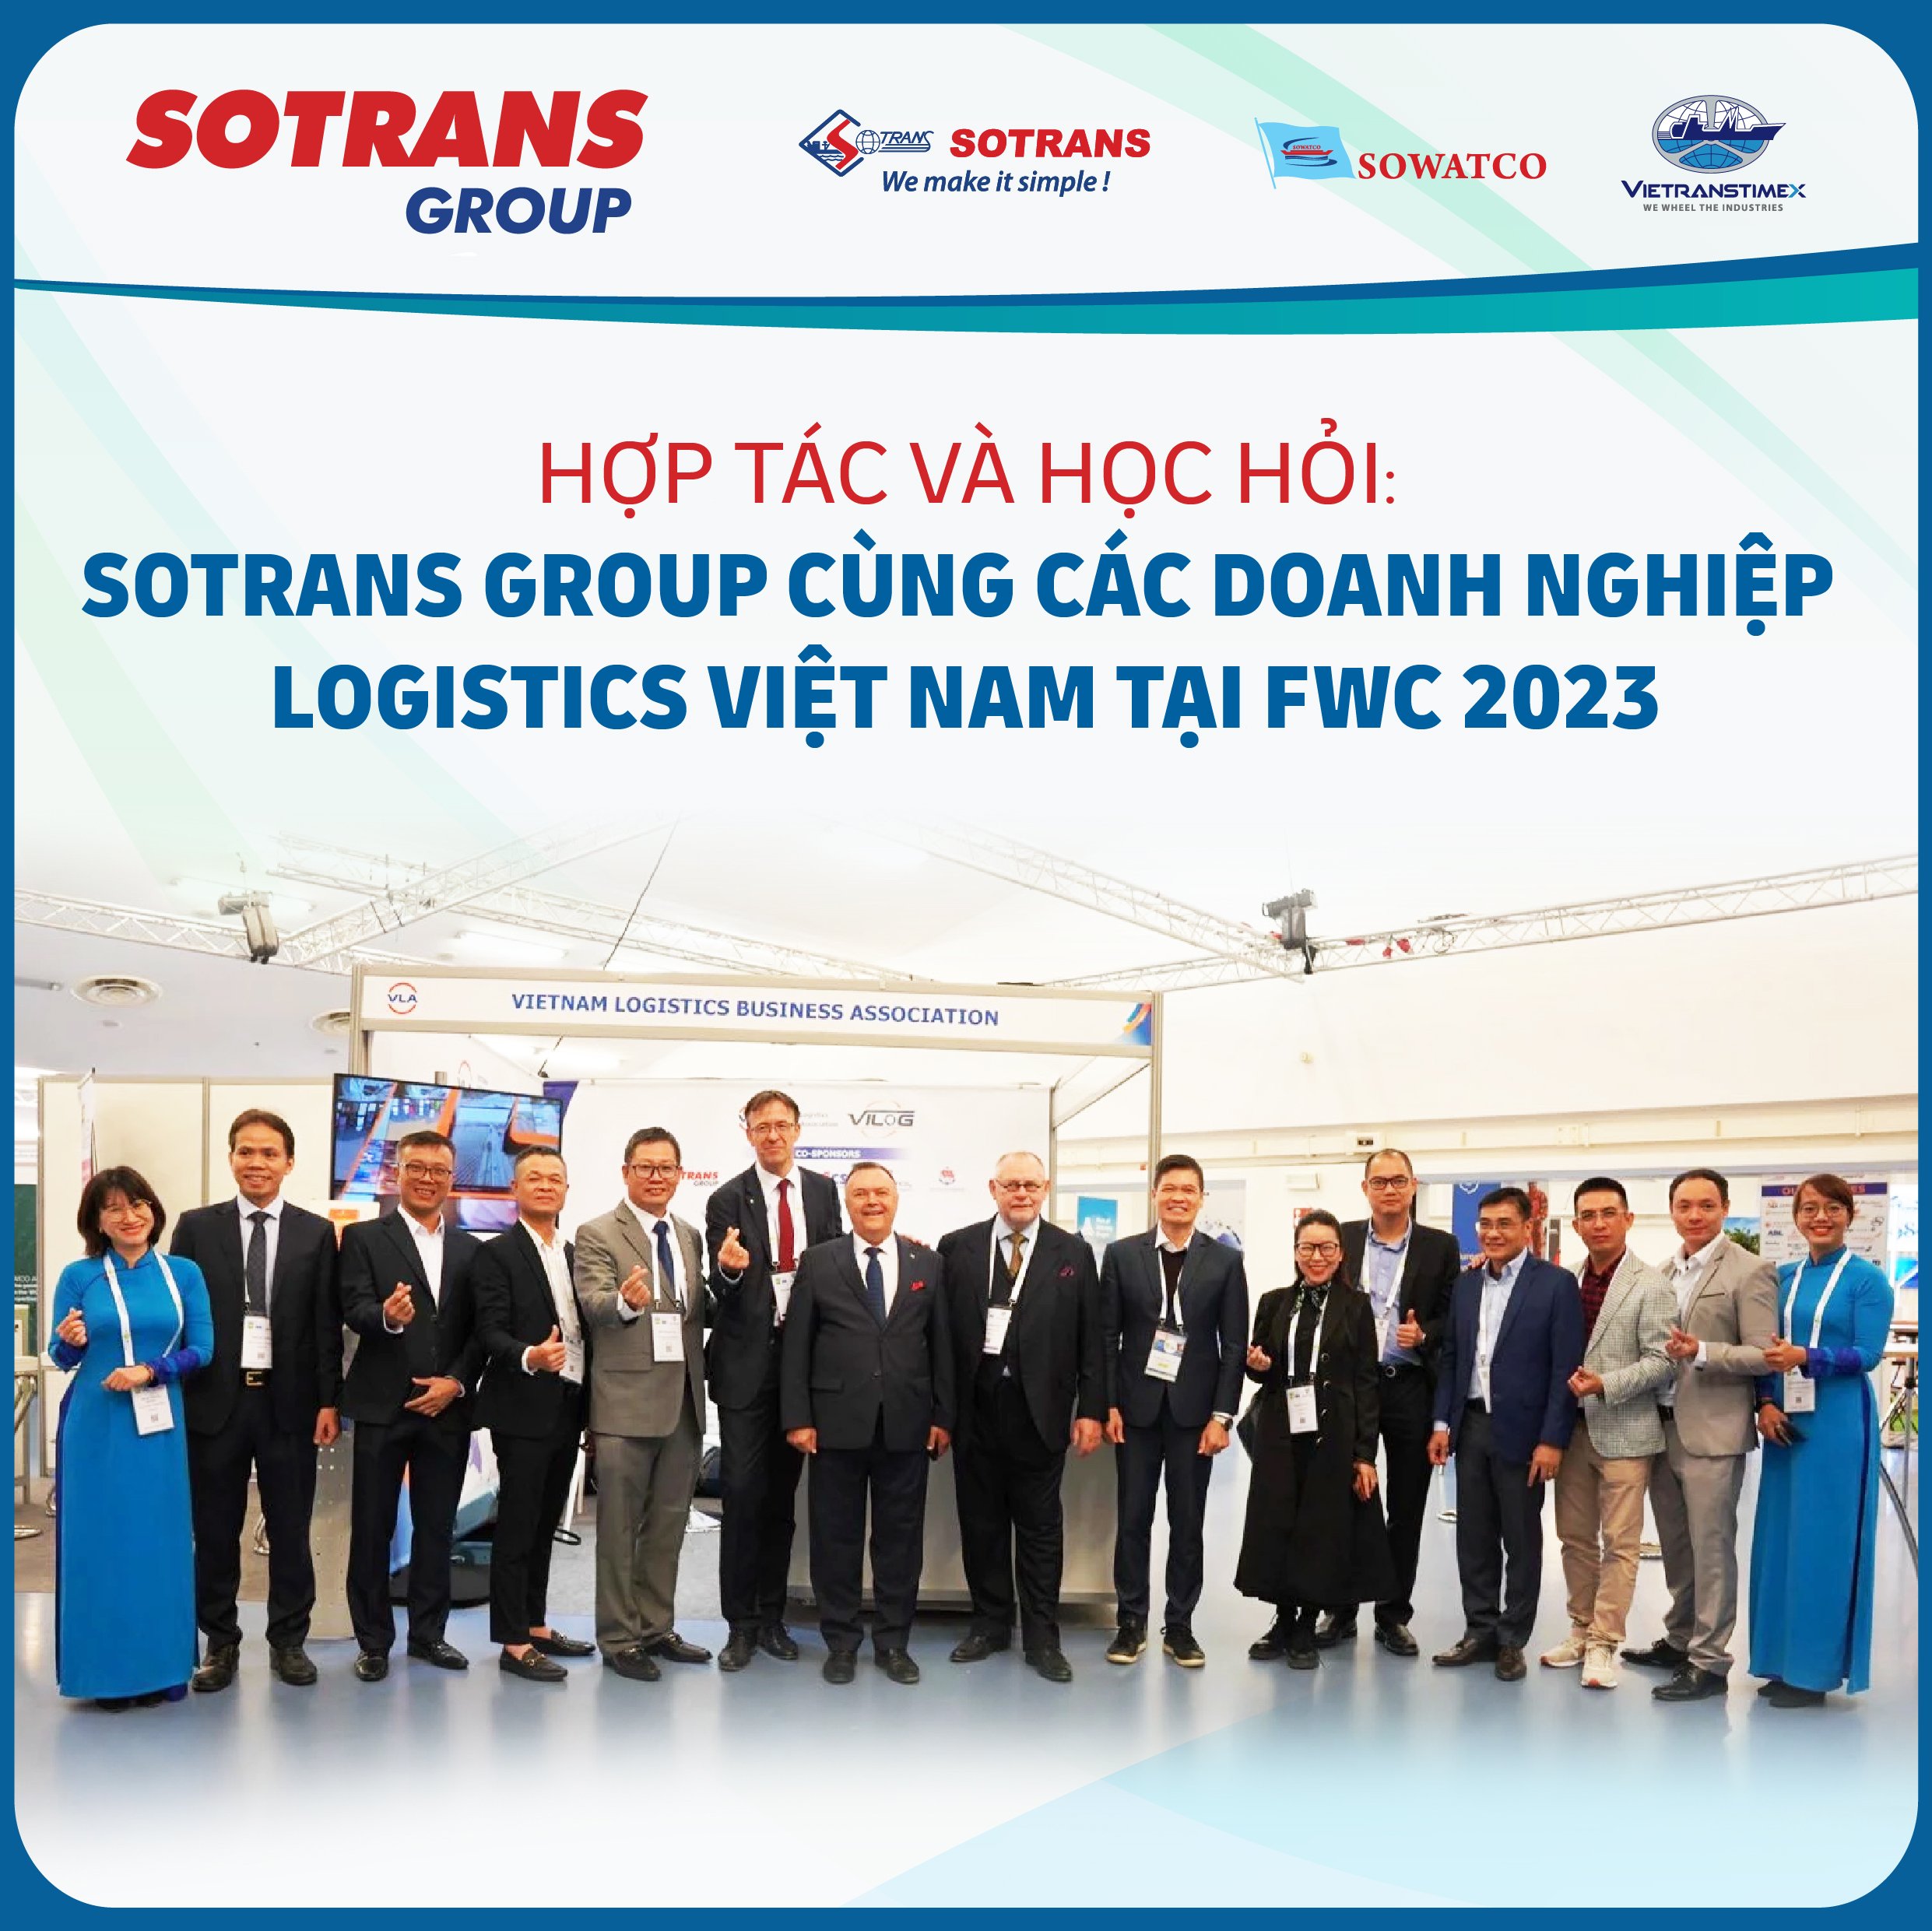 Collaboration and Learning: SOTRANS Group and Vietnamese Logistics Businesses at FWC 2023